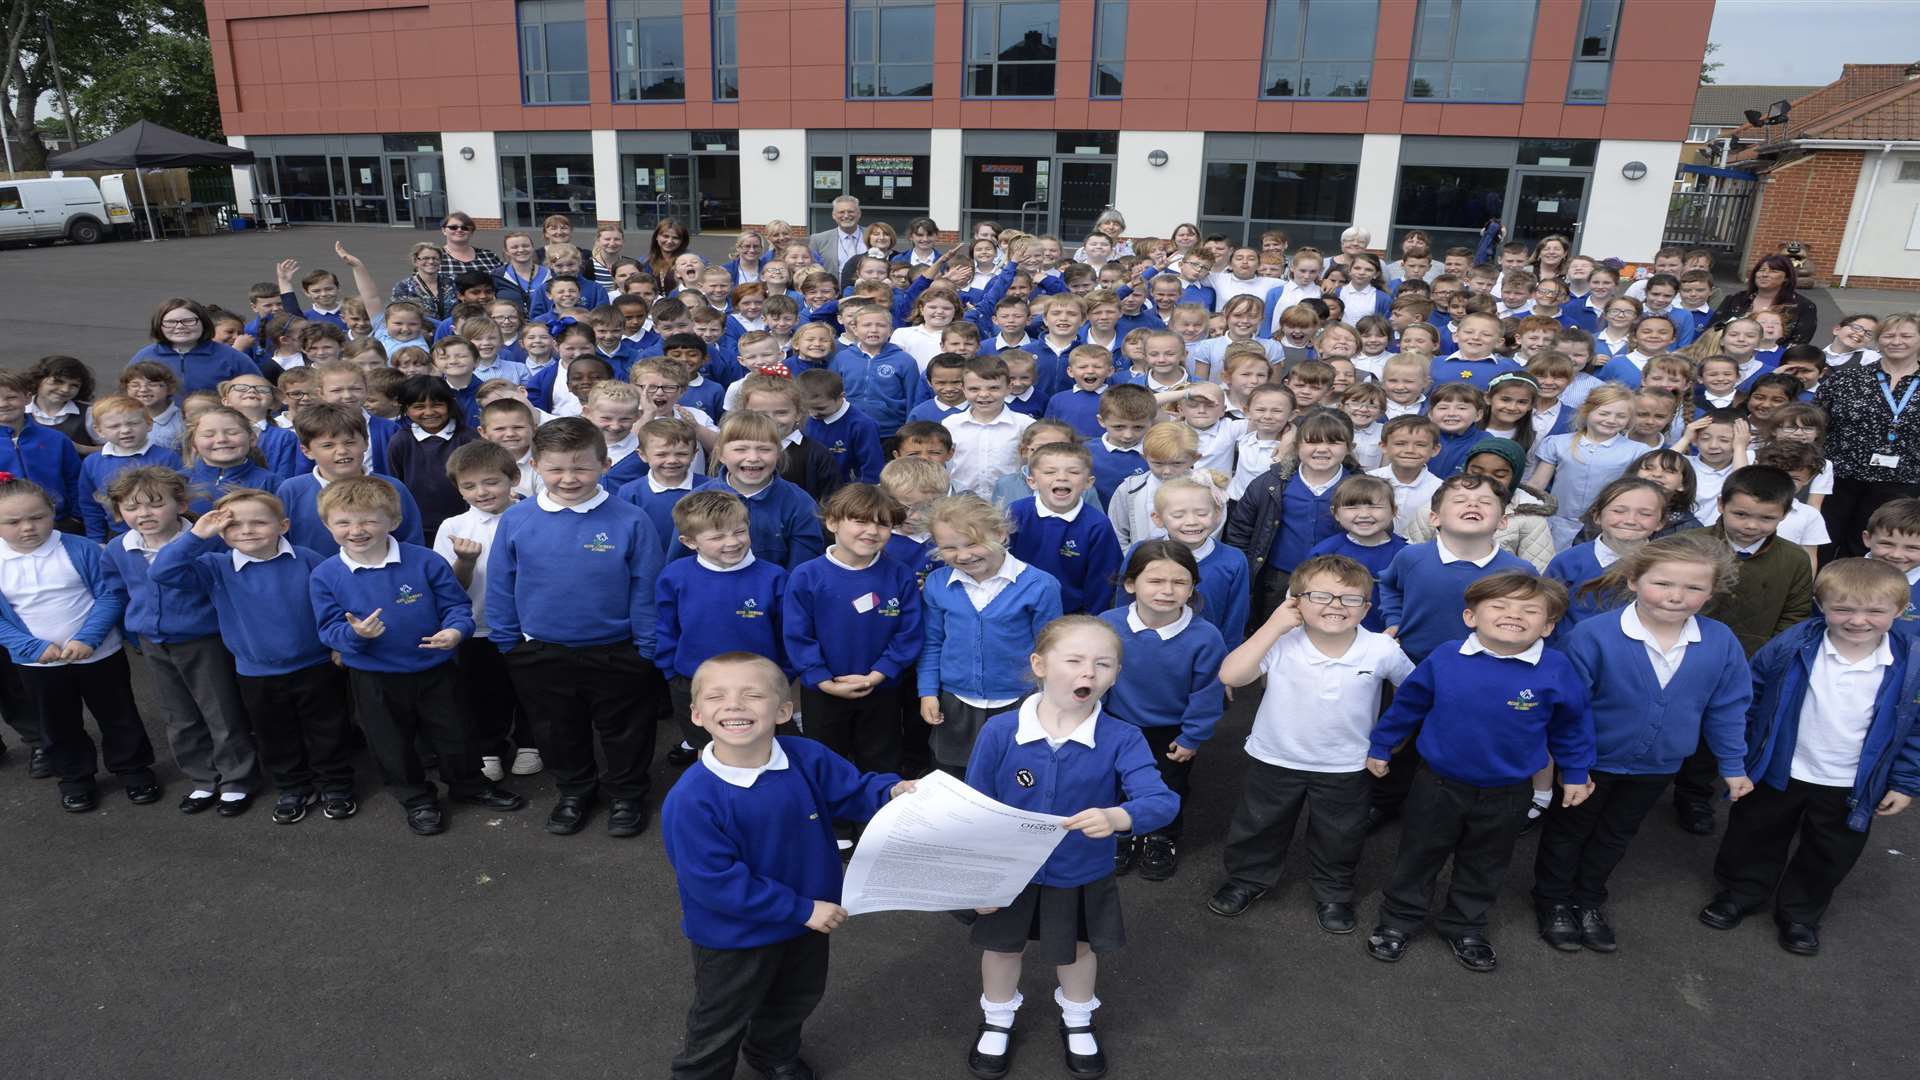 Staff and pupils at Rose Street Primary School, Sheerness which has gained a good Ofsted rating.